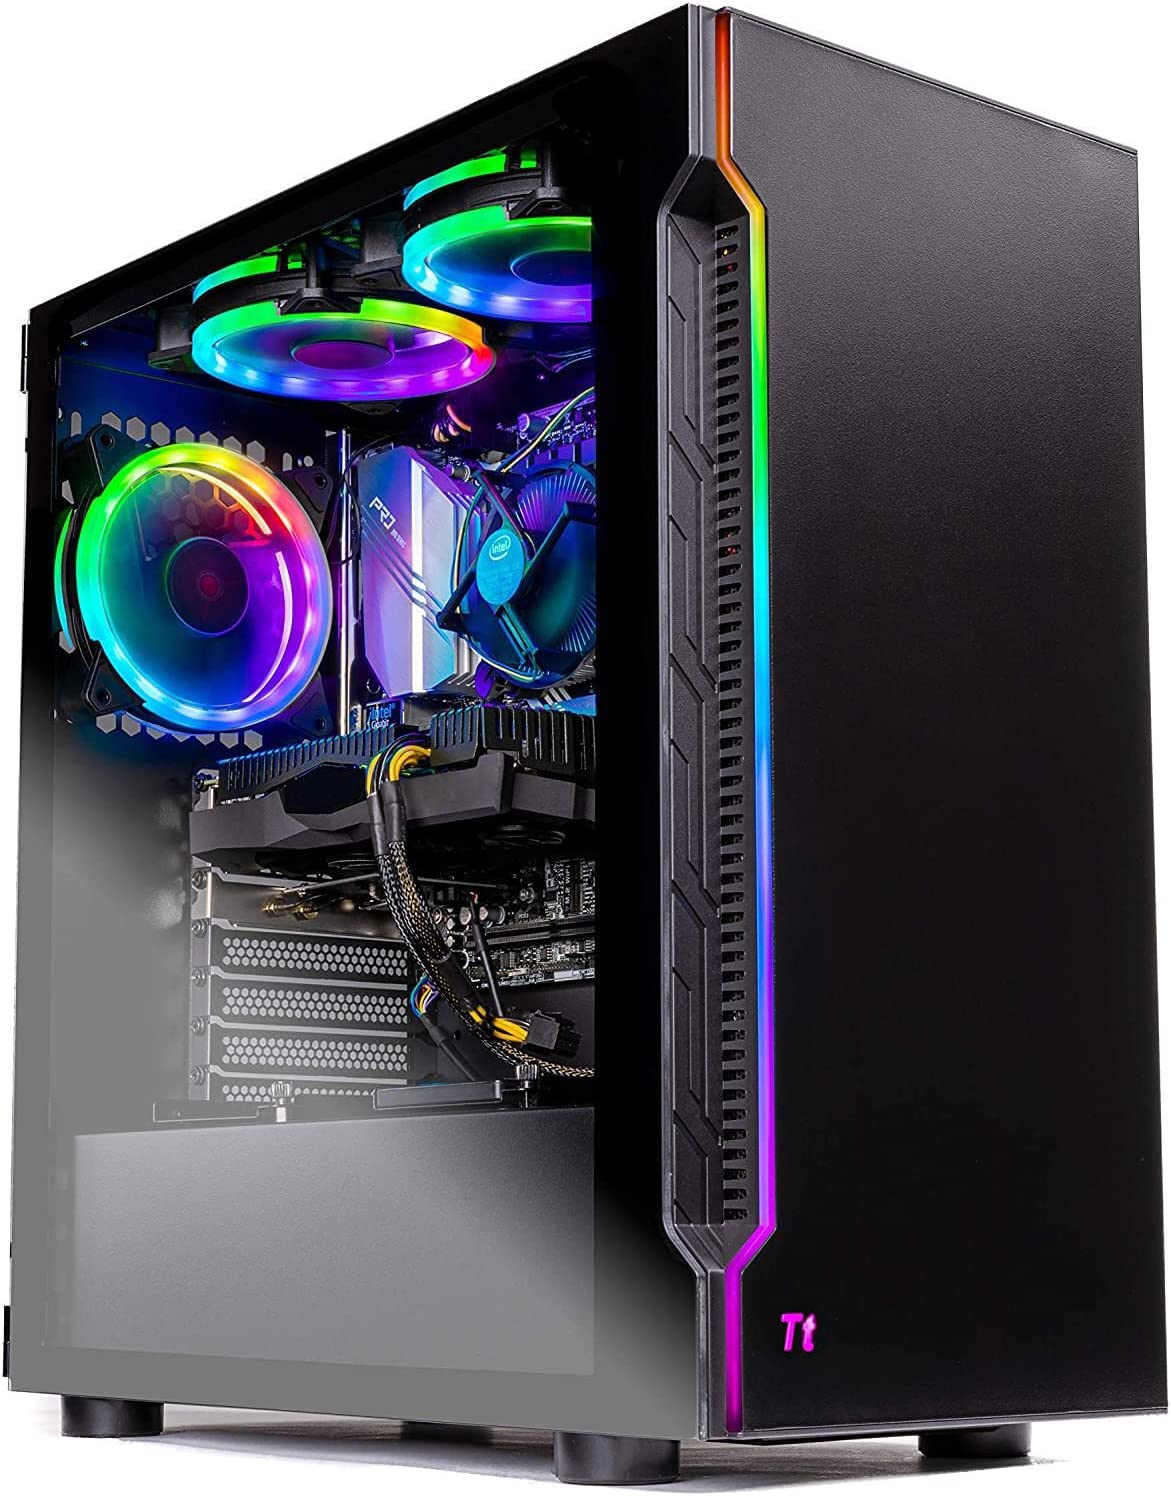 Best gaming PC under $1000: Full 2022 Guide (With to Assemble a Custom Build PC) - appPicker